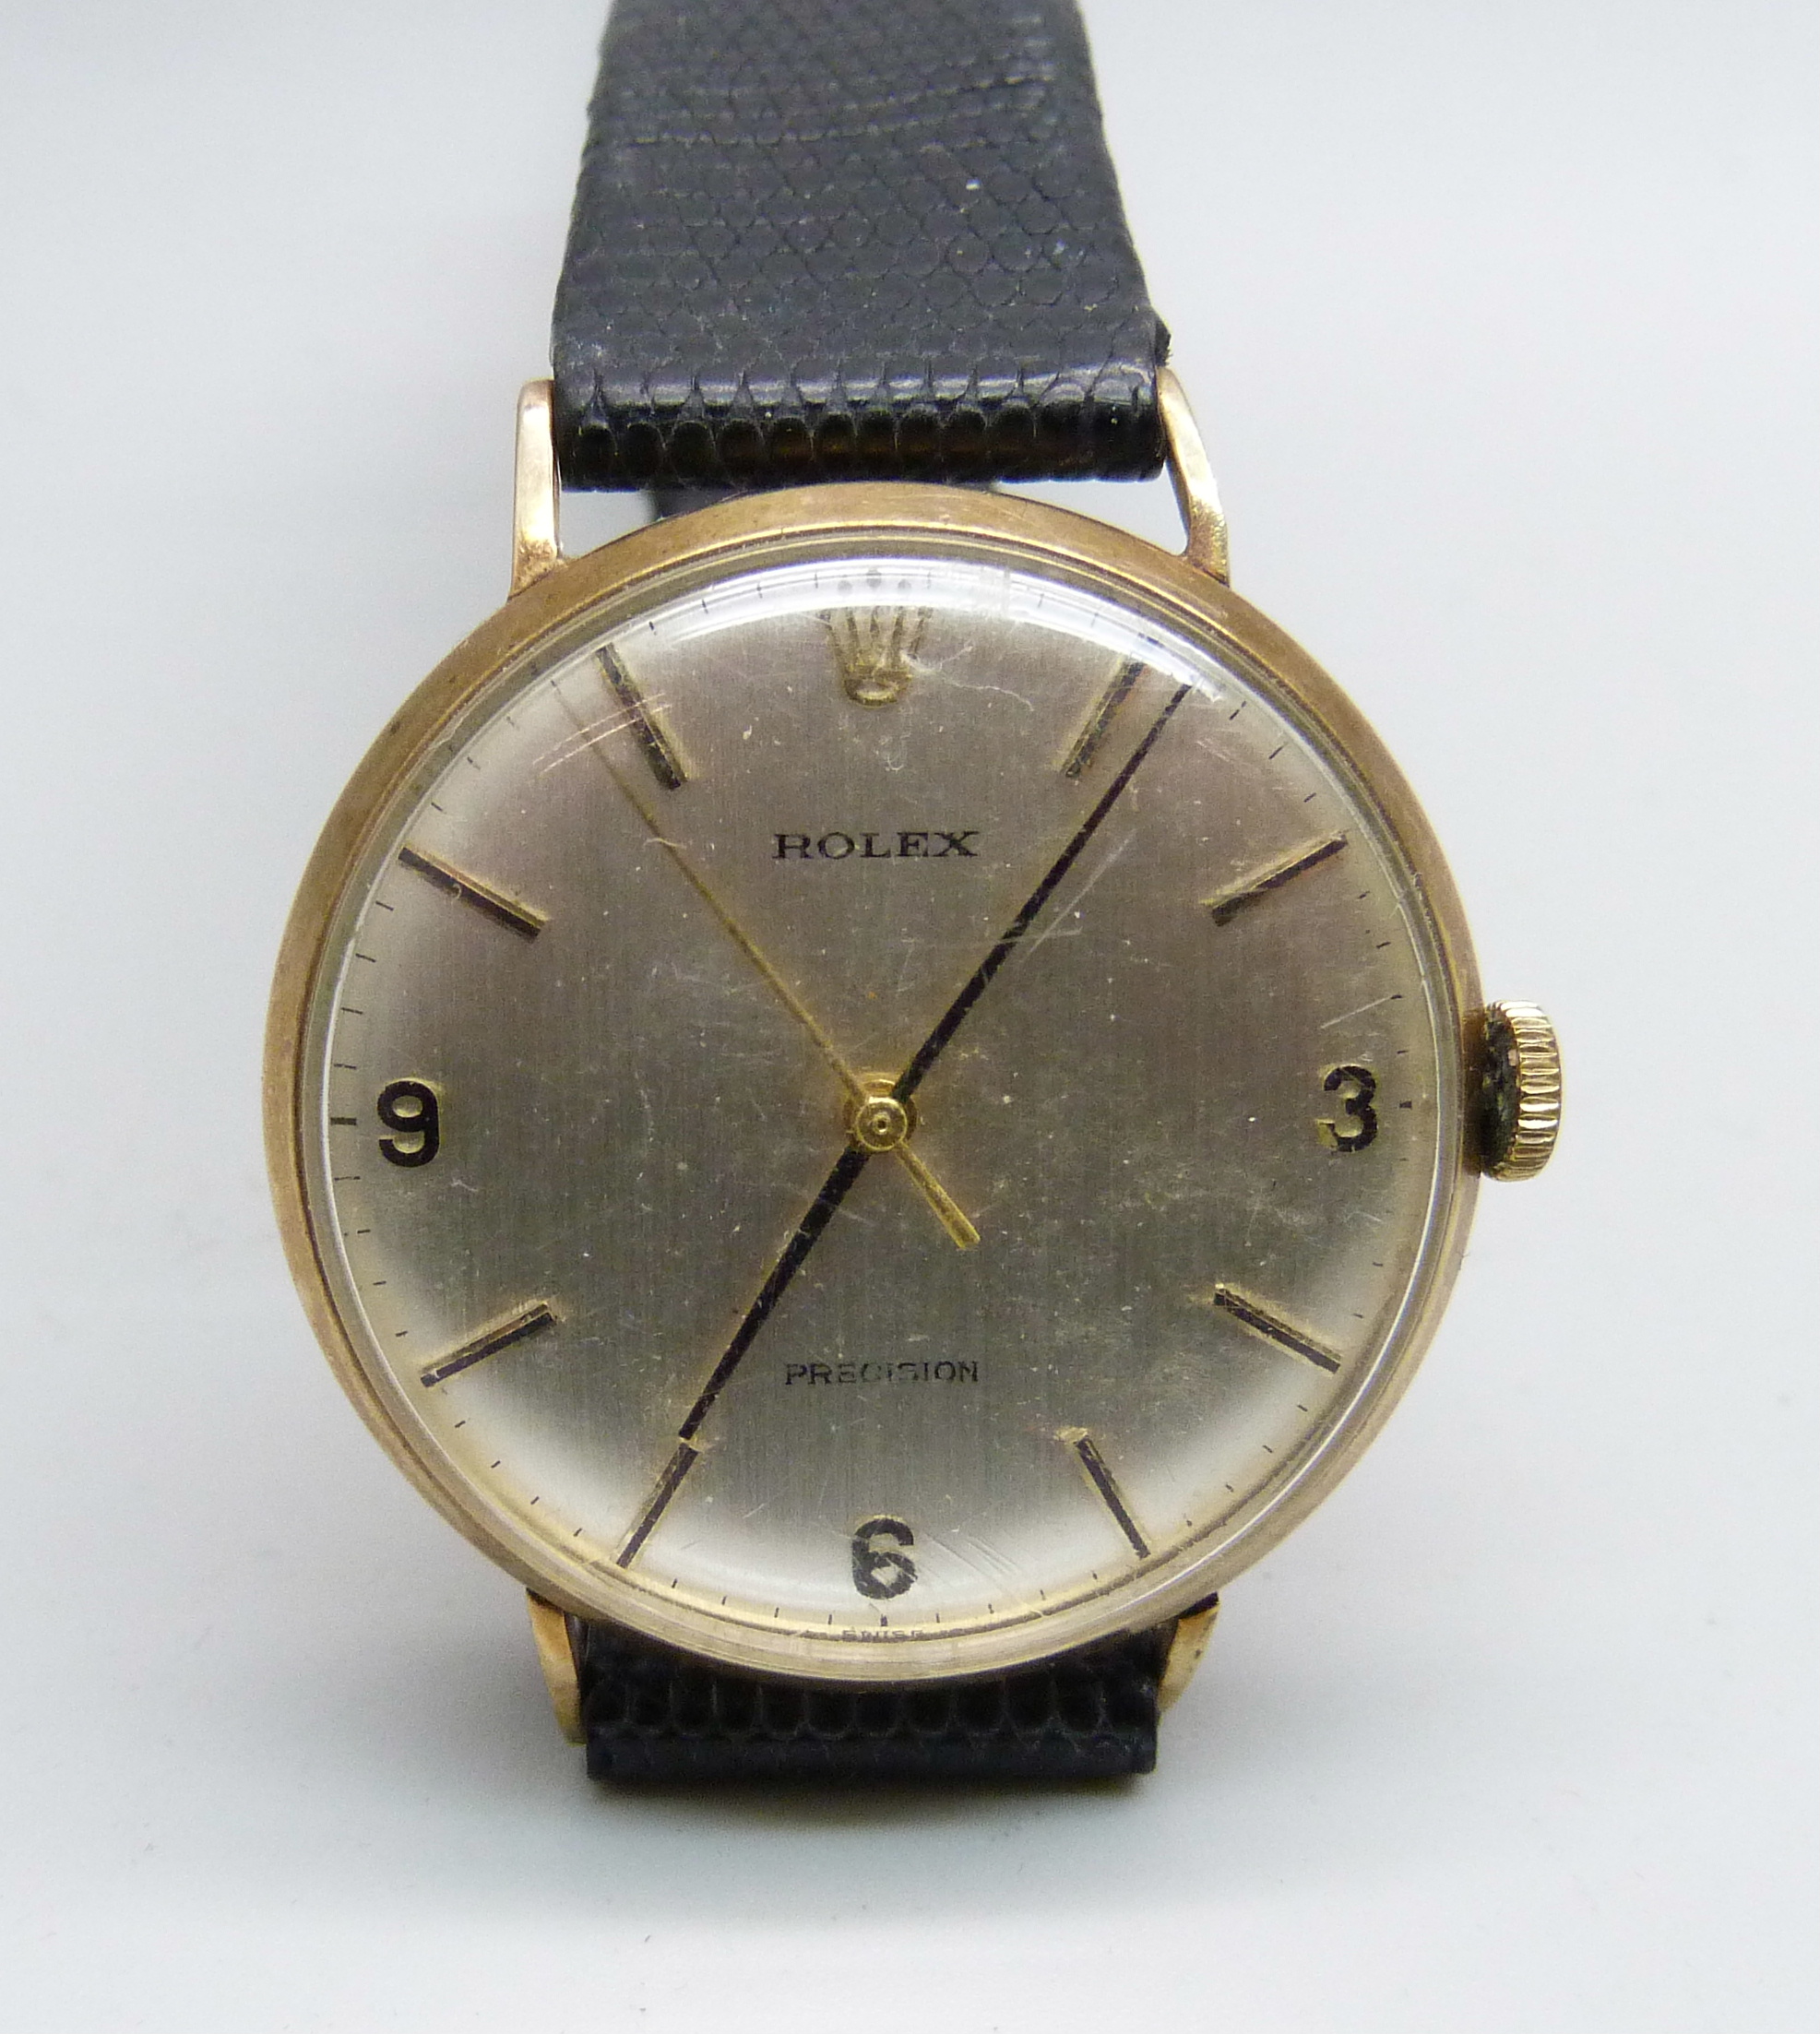 A 9ct gold cased Rolex Precision wristwatch, the case back bears inscription dated 1975, 31mm case